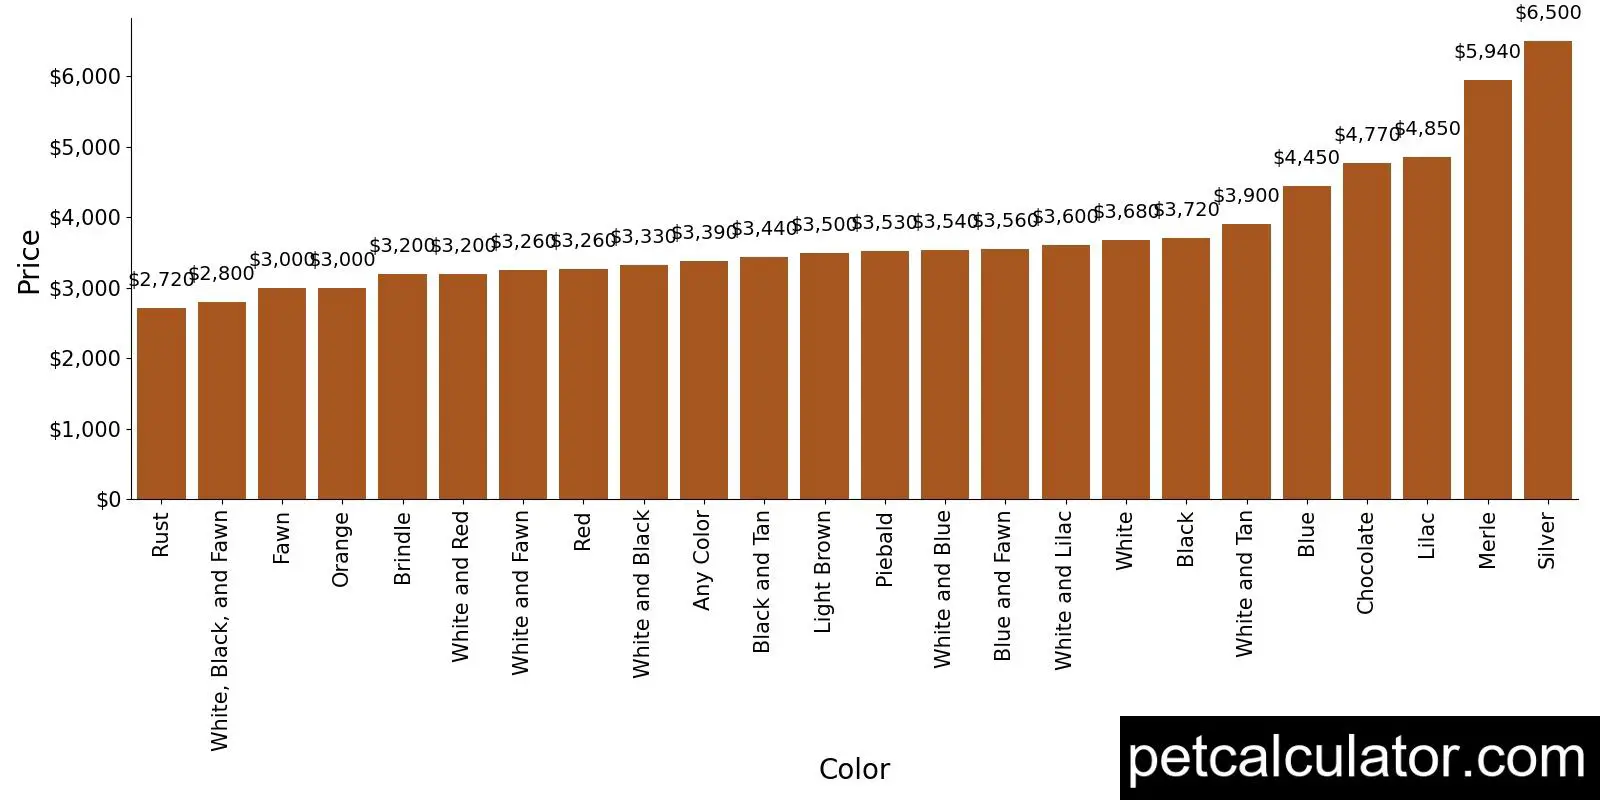 Price of Bulldog by Color 